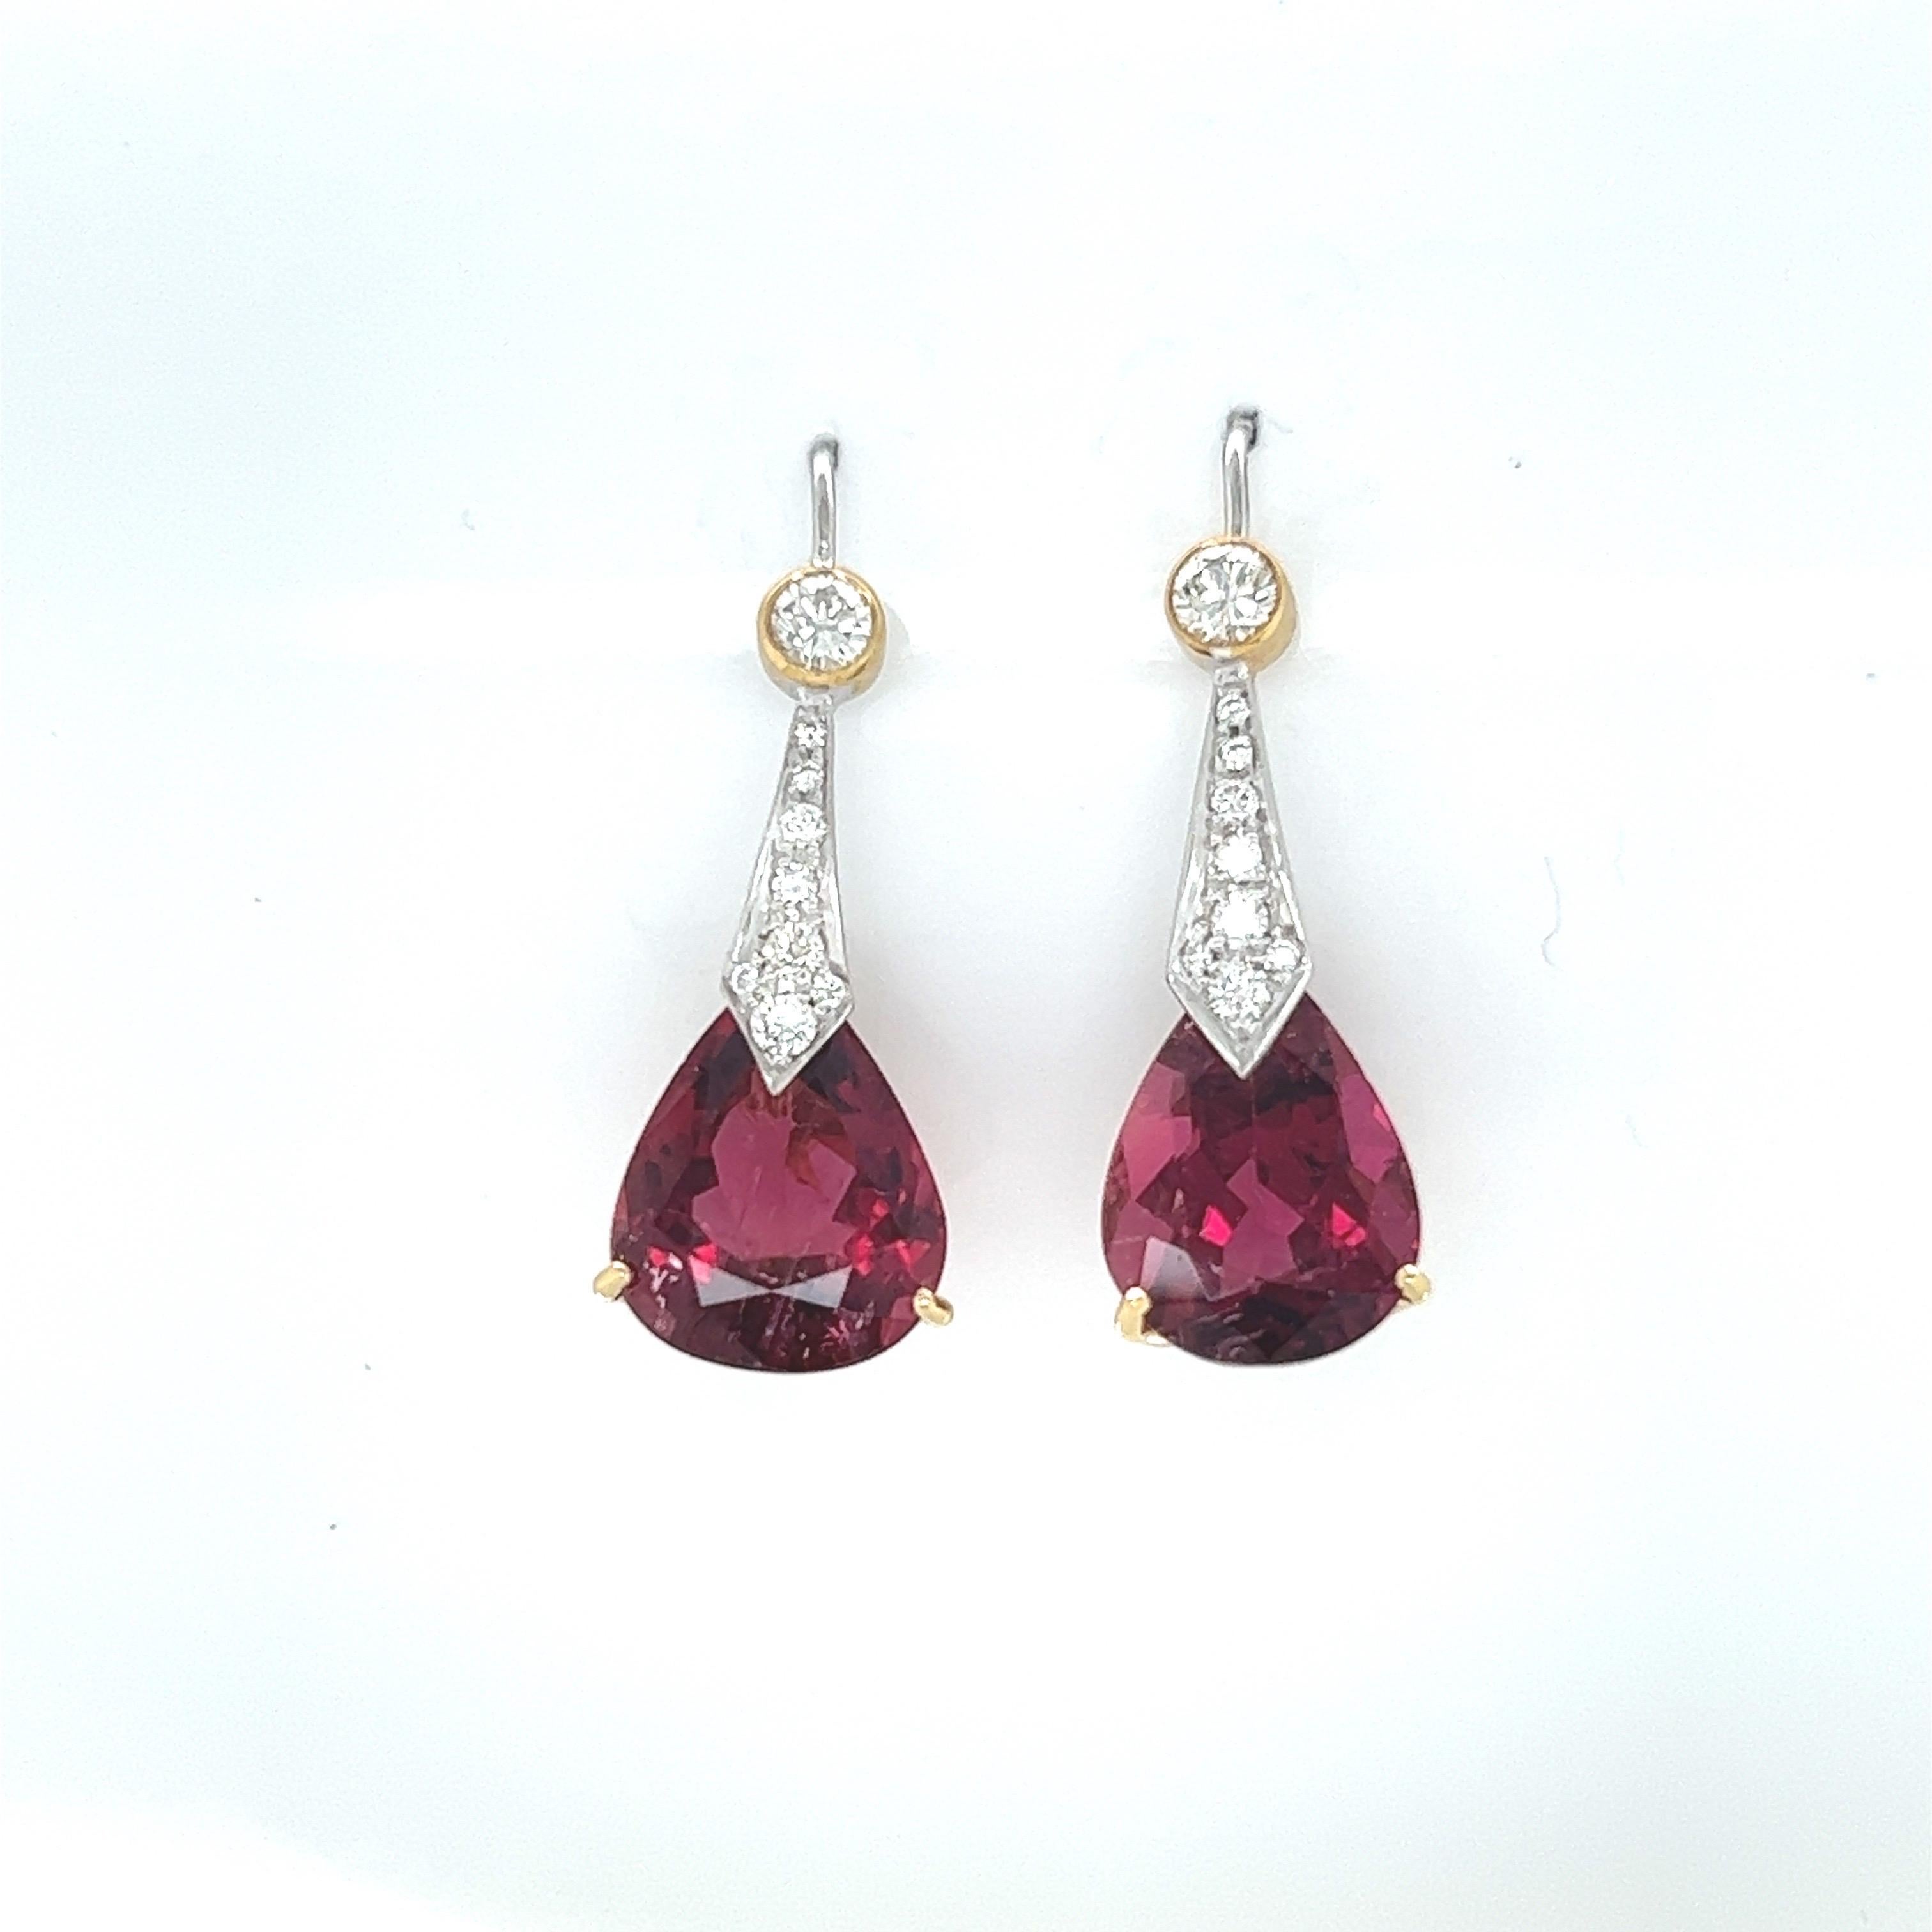 18k white and yellow gold earrings with approx. 24tct rubelite and approx. 0.80tct white diamonds.
Total length approx. 34mm x 11mm.

